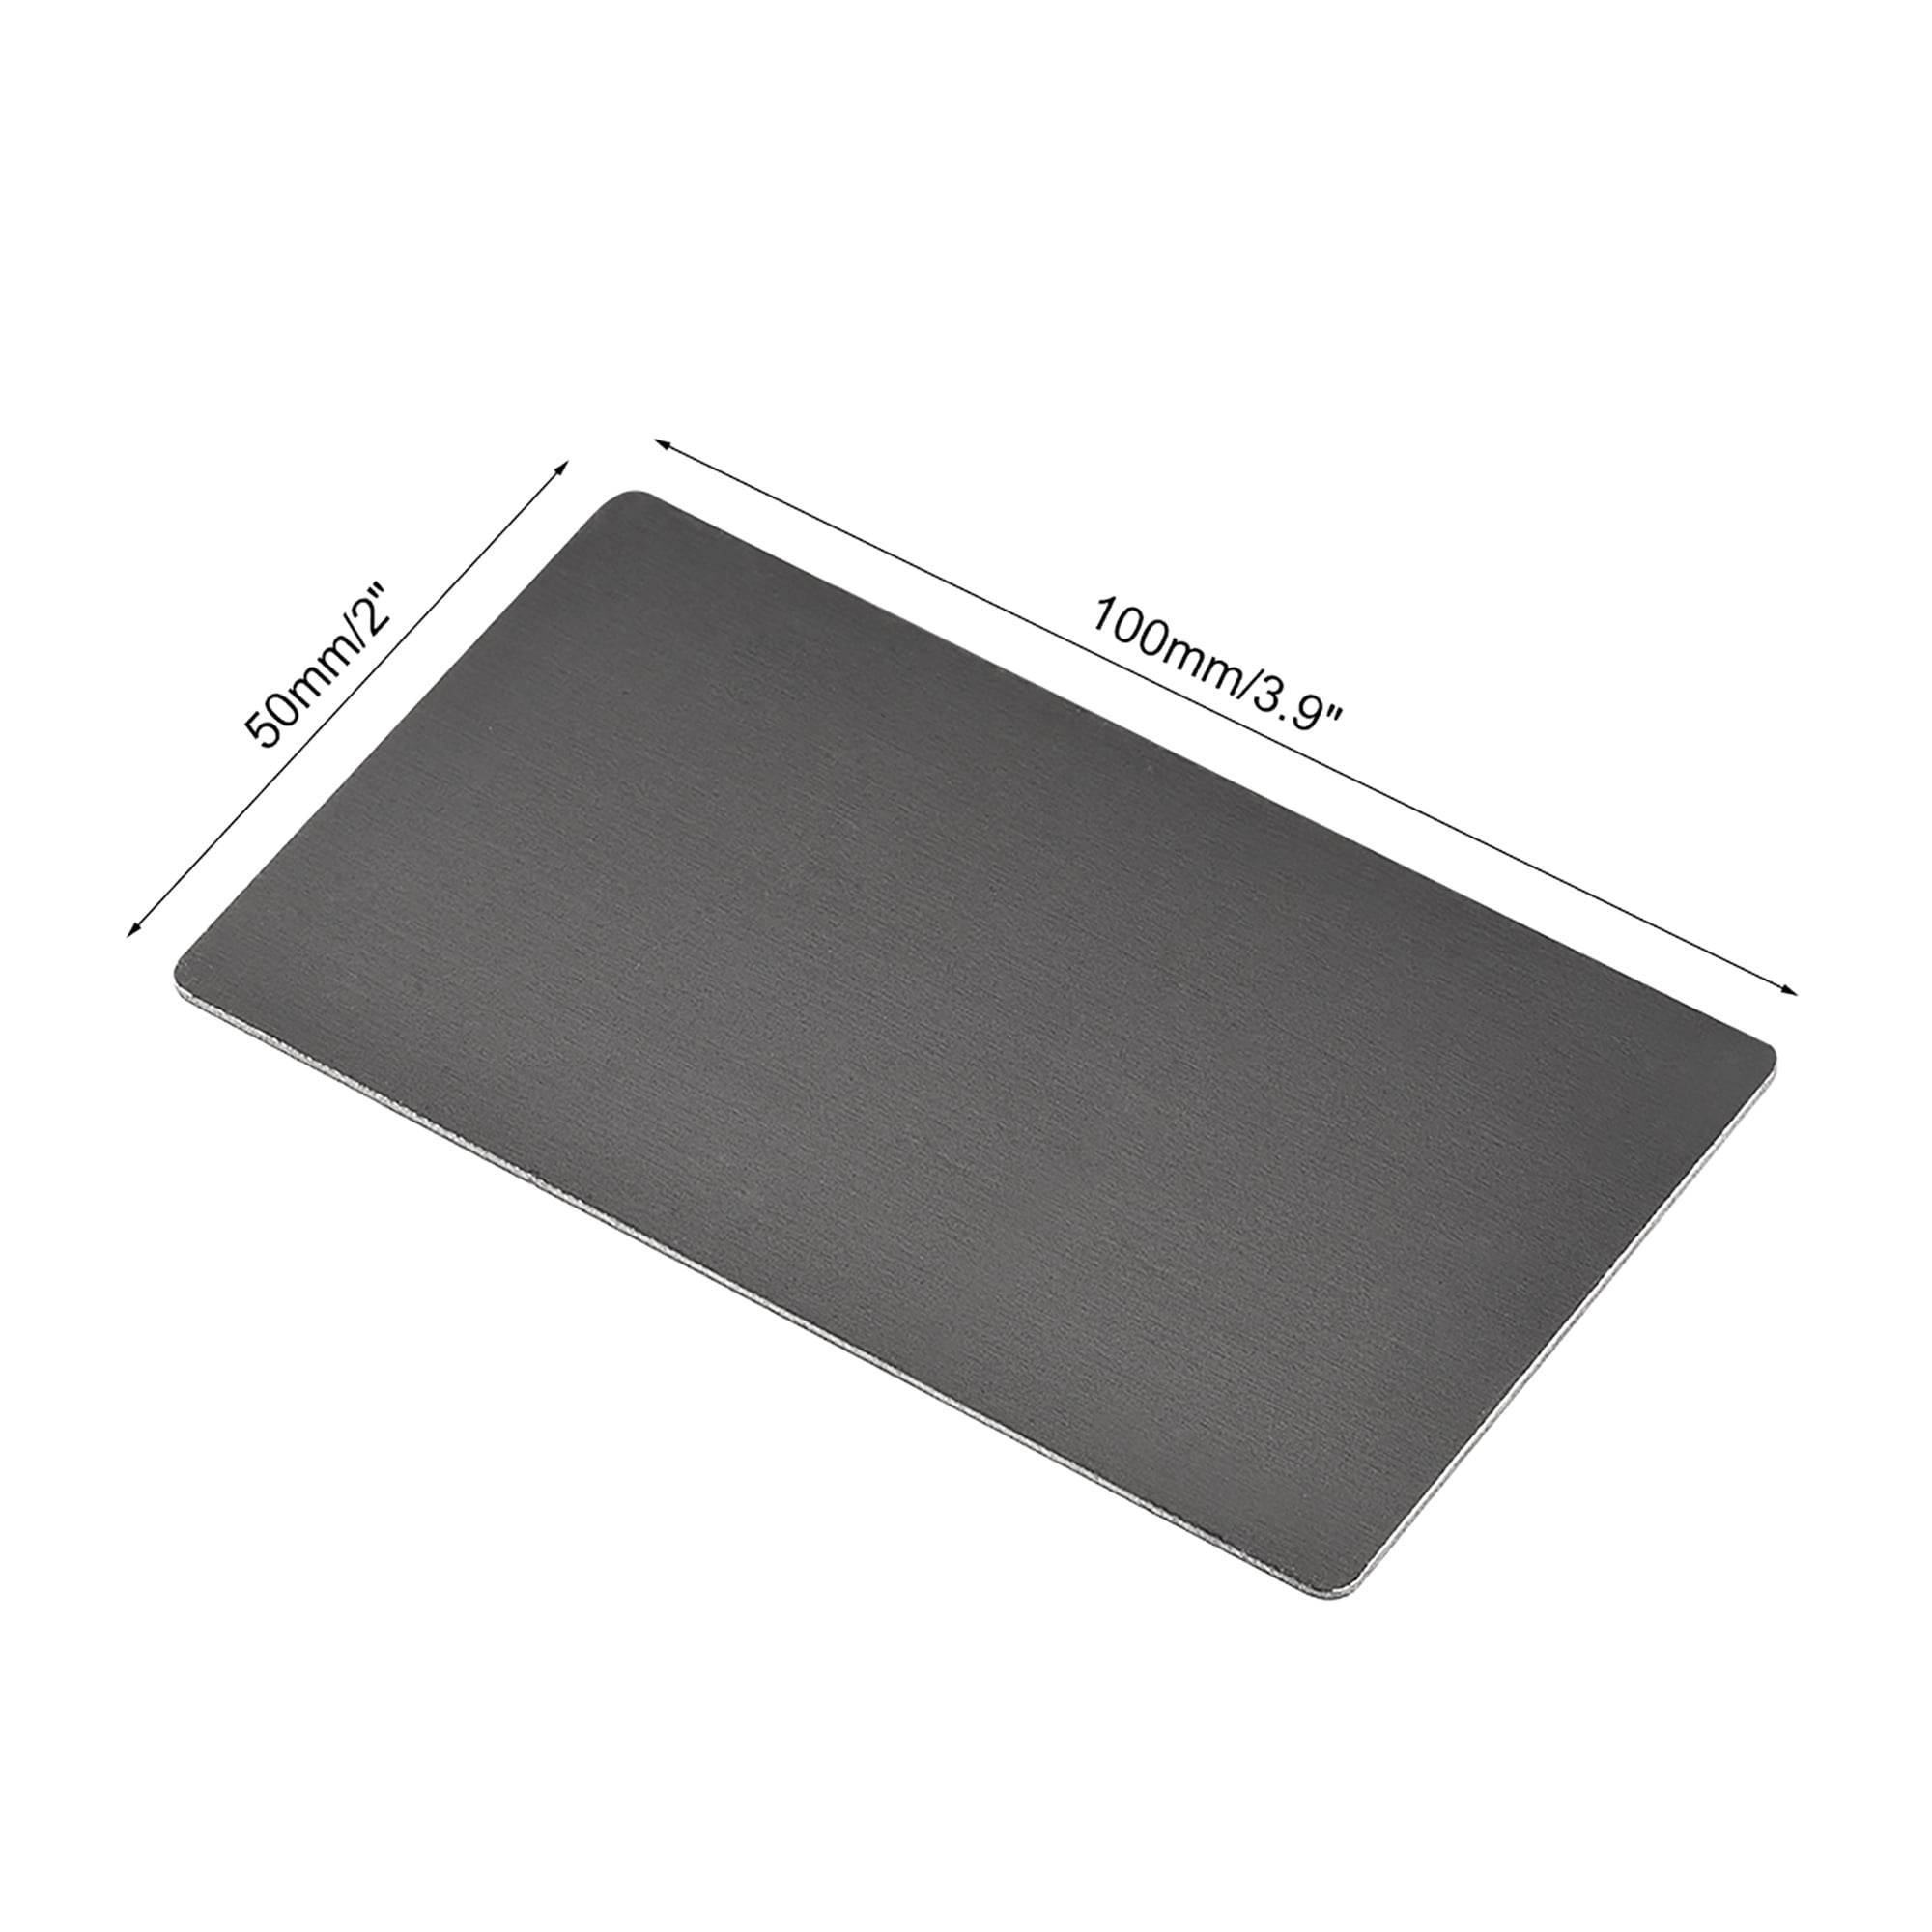 Uxcell Blank Metal Card Anodized Aluminum Plate for DIY Laser Printing  Black 3.9x 2.0x 0.03